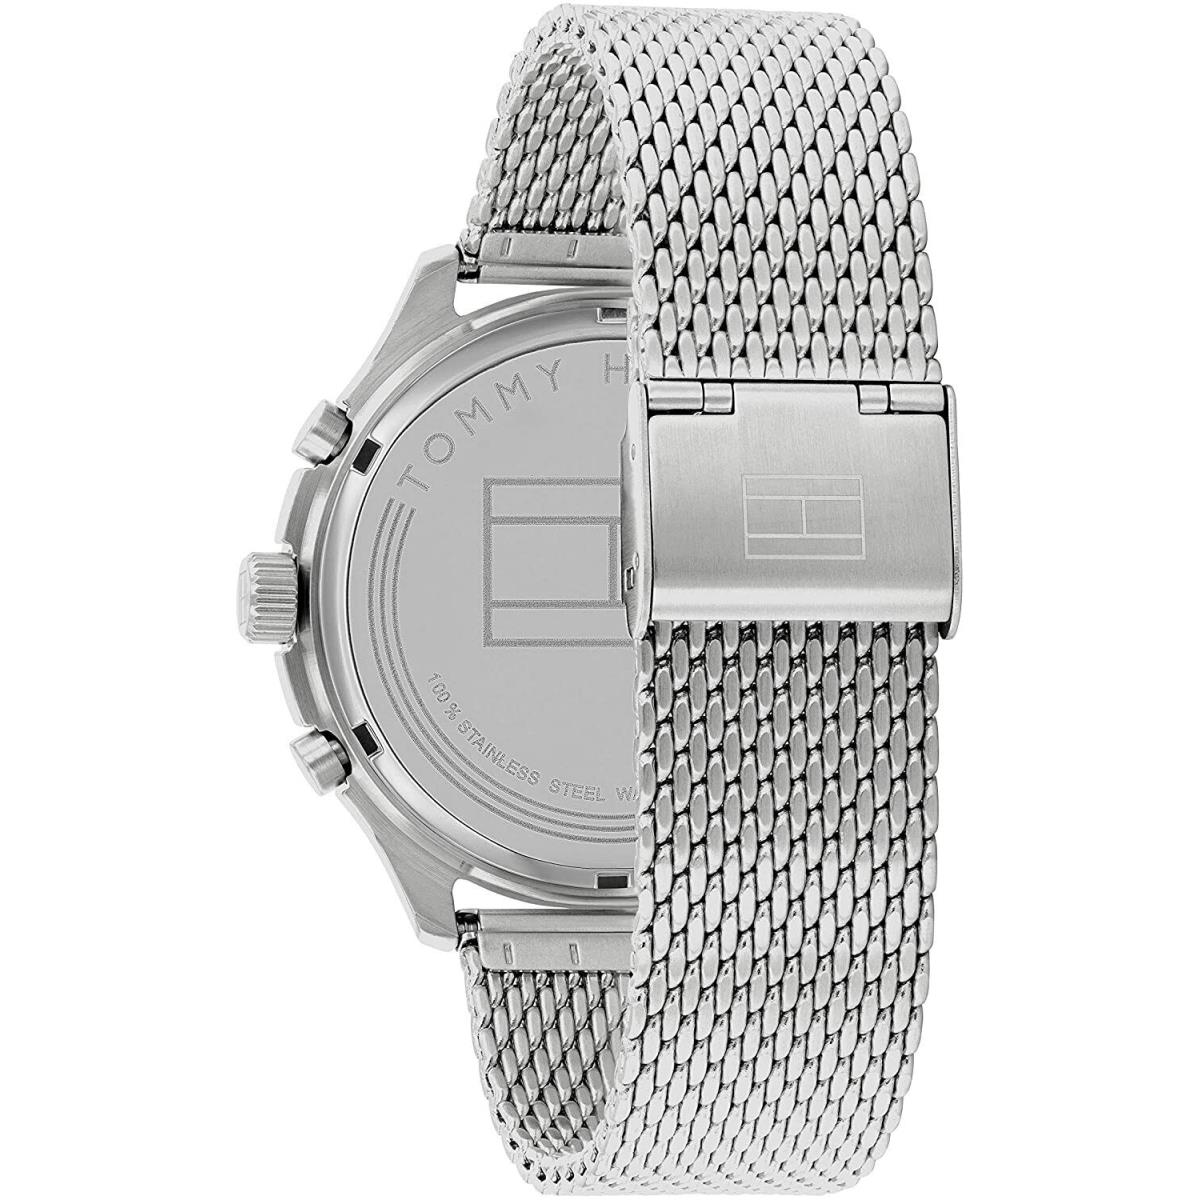 Tommy Hilfiger Multifunction Gray Dial Stainless Steel Men s Watch - 1791851 - Dial: Gray, Band: Silver, Bezel: Silver